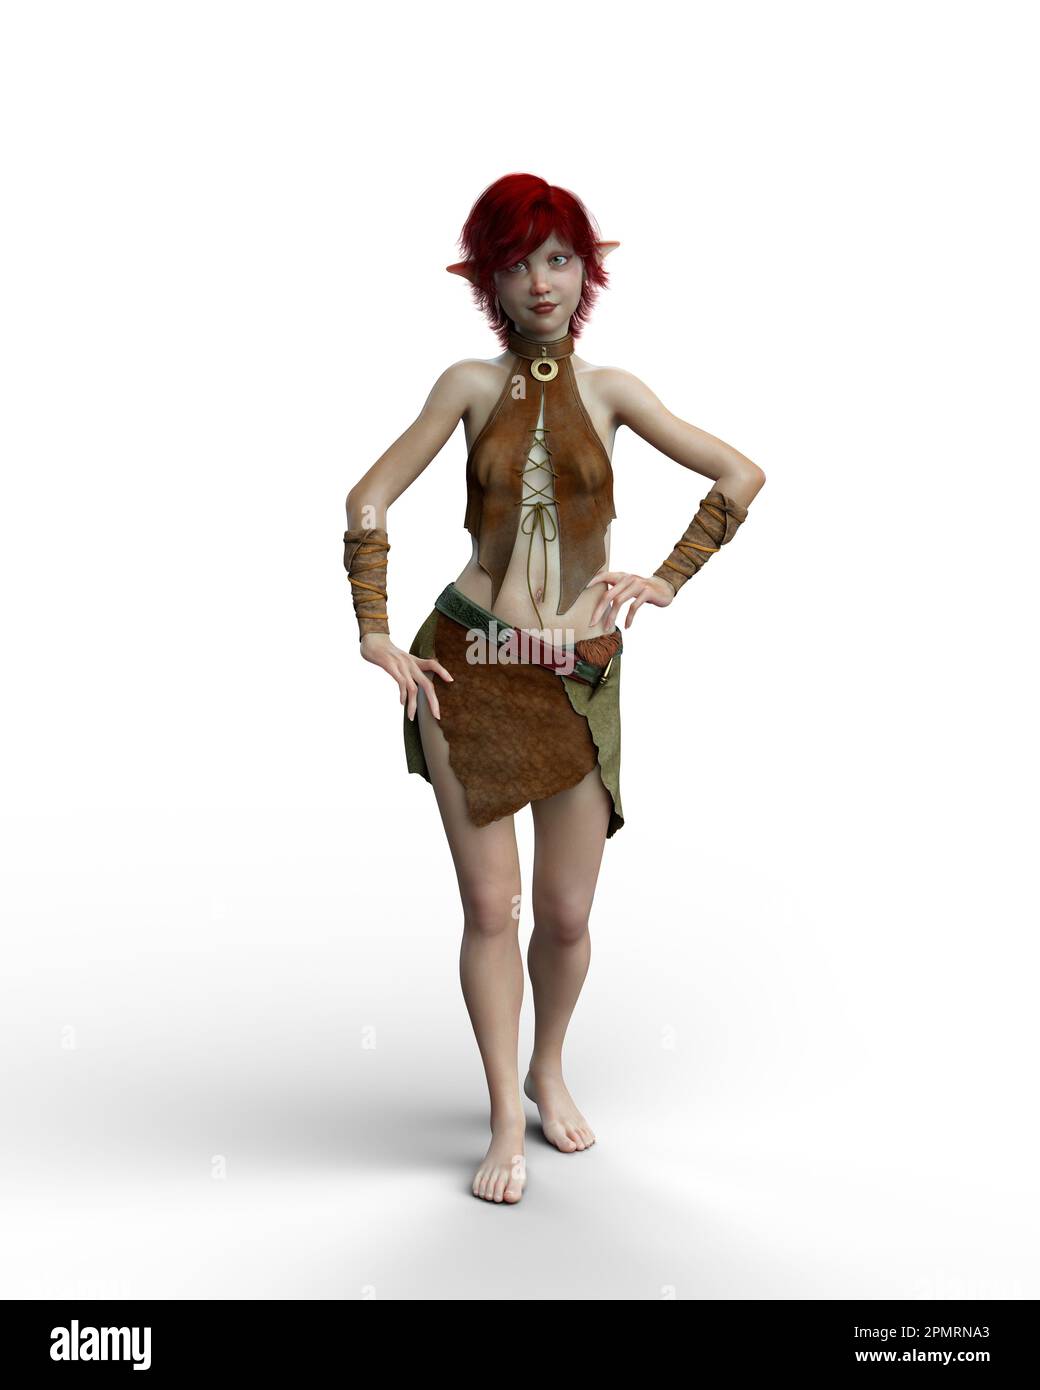 Cute female pixie, a mythical elf like creature from English folklore. 3D illustration isolated on a white background. Stock Photo